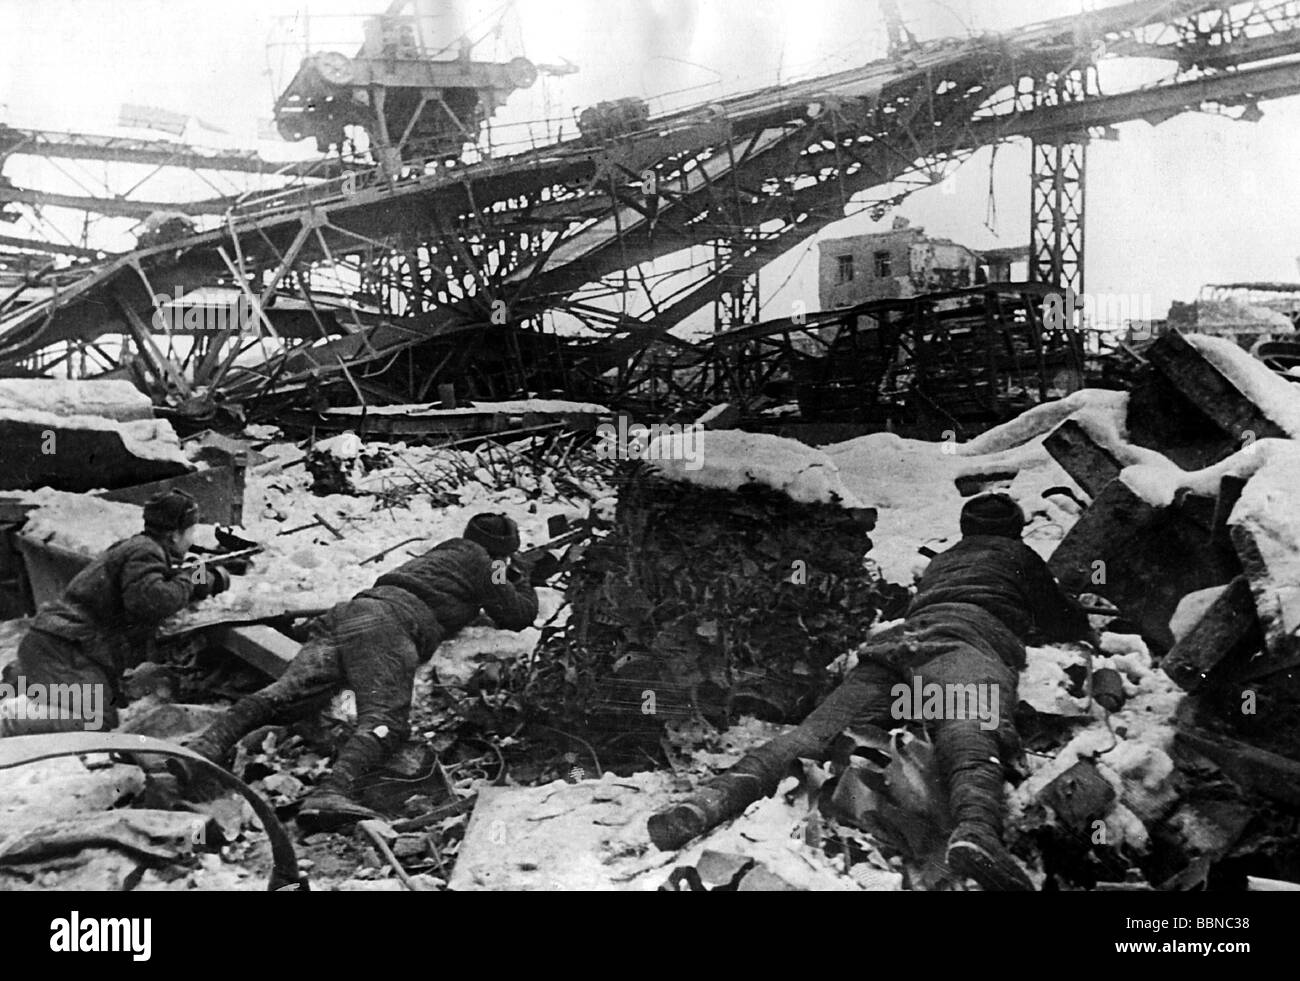 events, Second World War / WWII, Russia, Stalingrad 1942 / 1943, Soviet soldiers during the fightings at the tractor factory 'Red October', Stock Photo